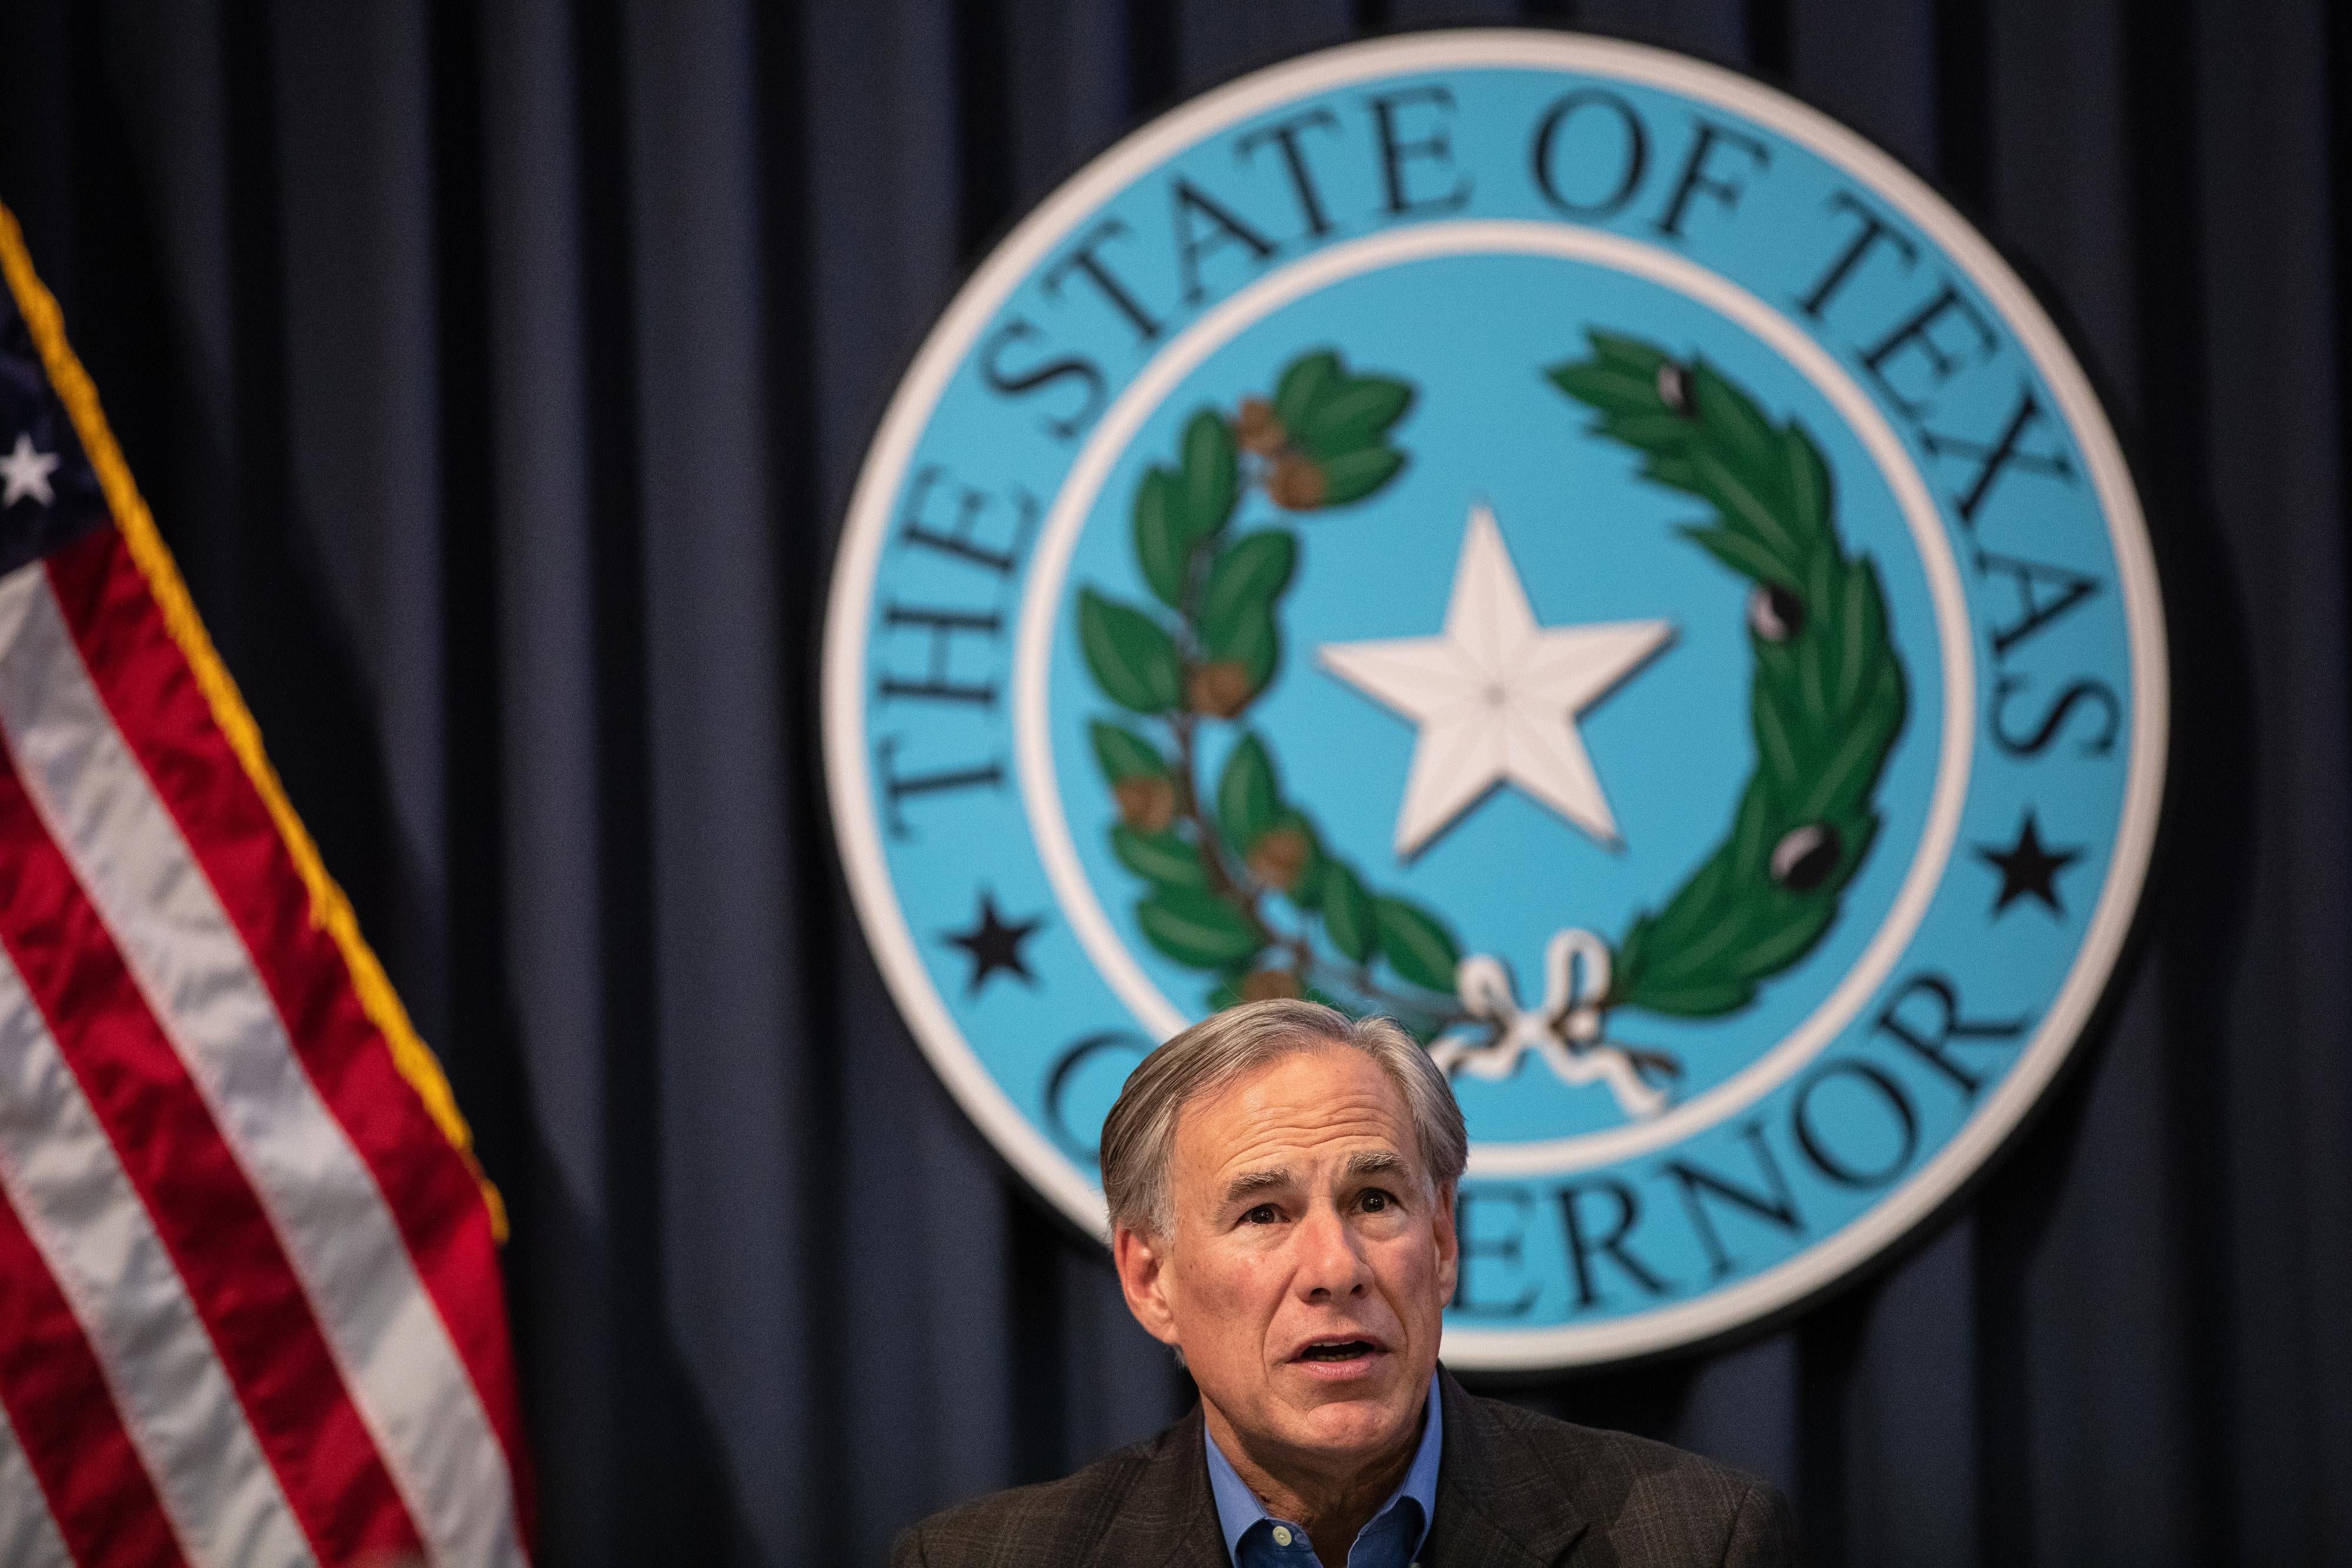 Greg Abbott speaks in front of the Texas states seal.